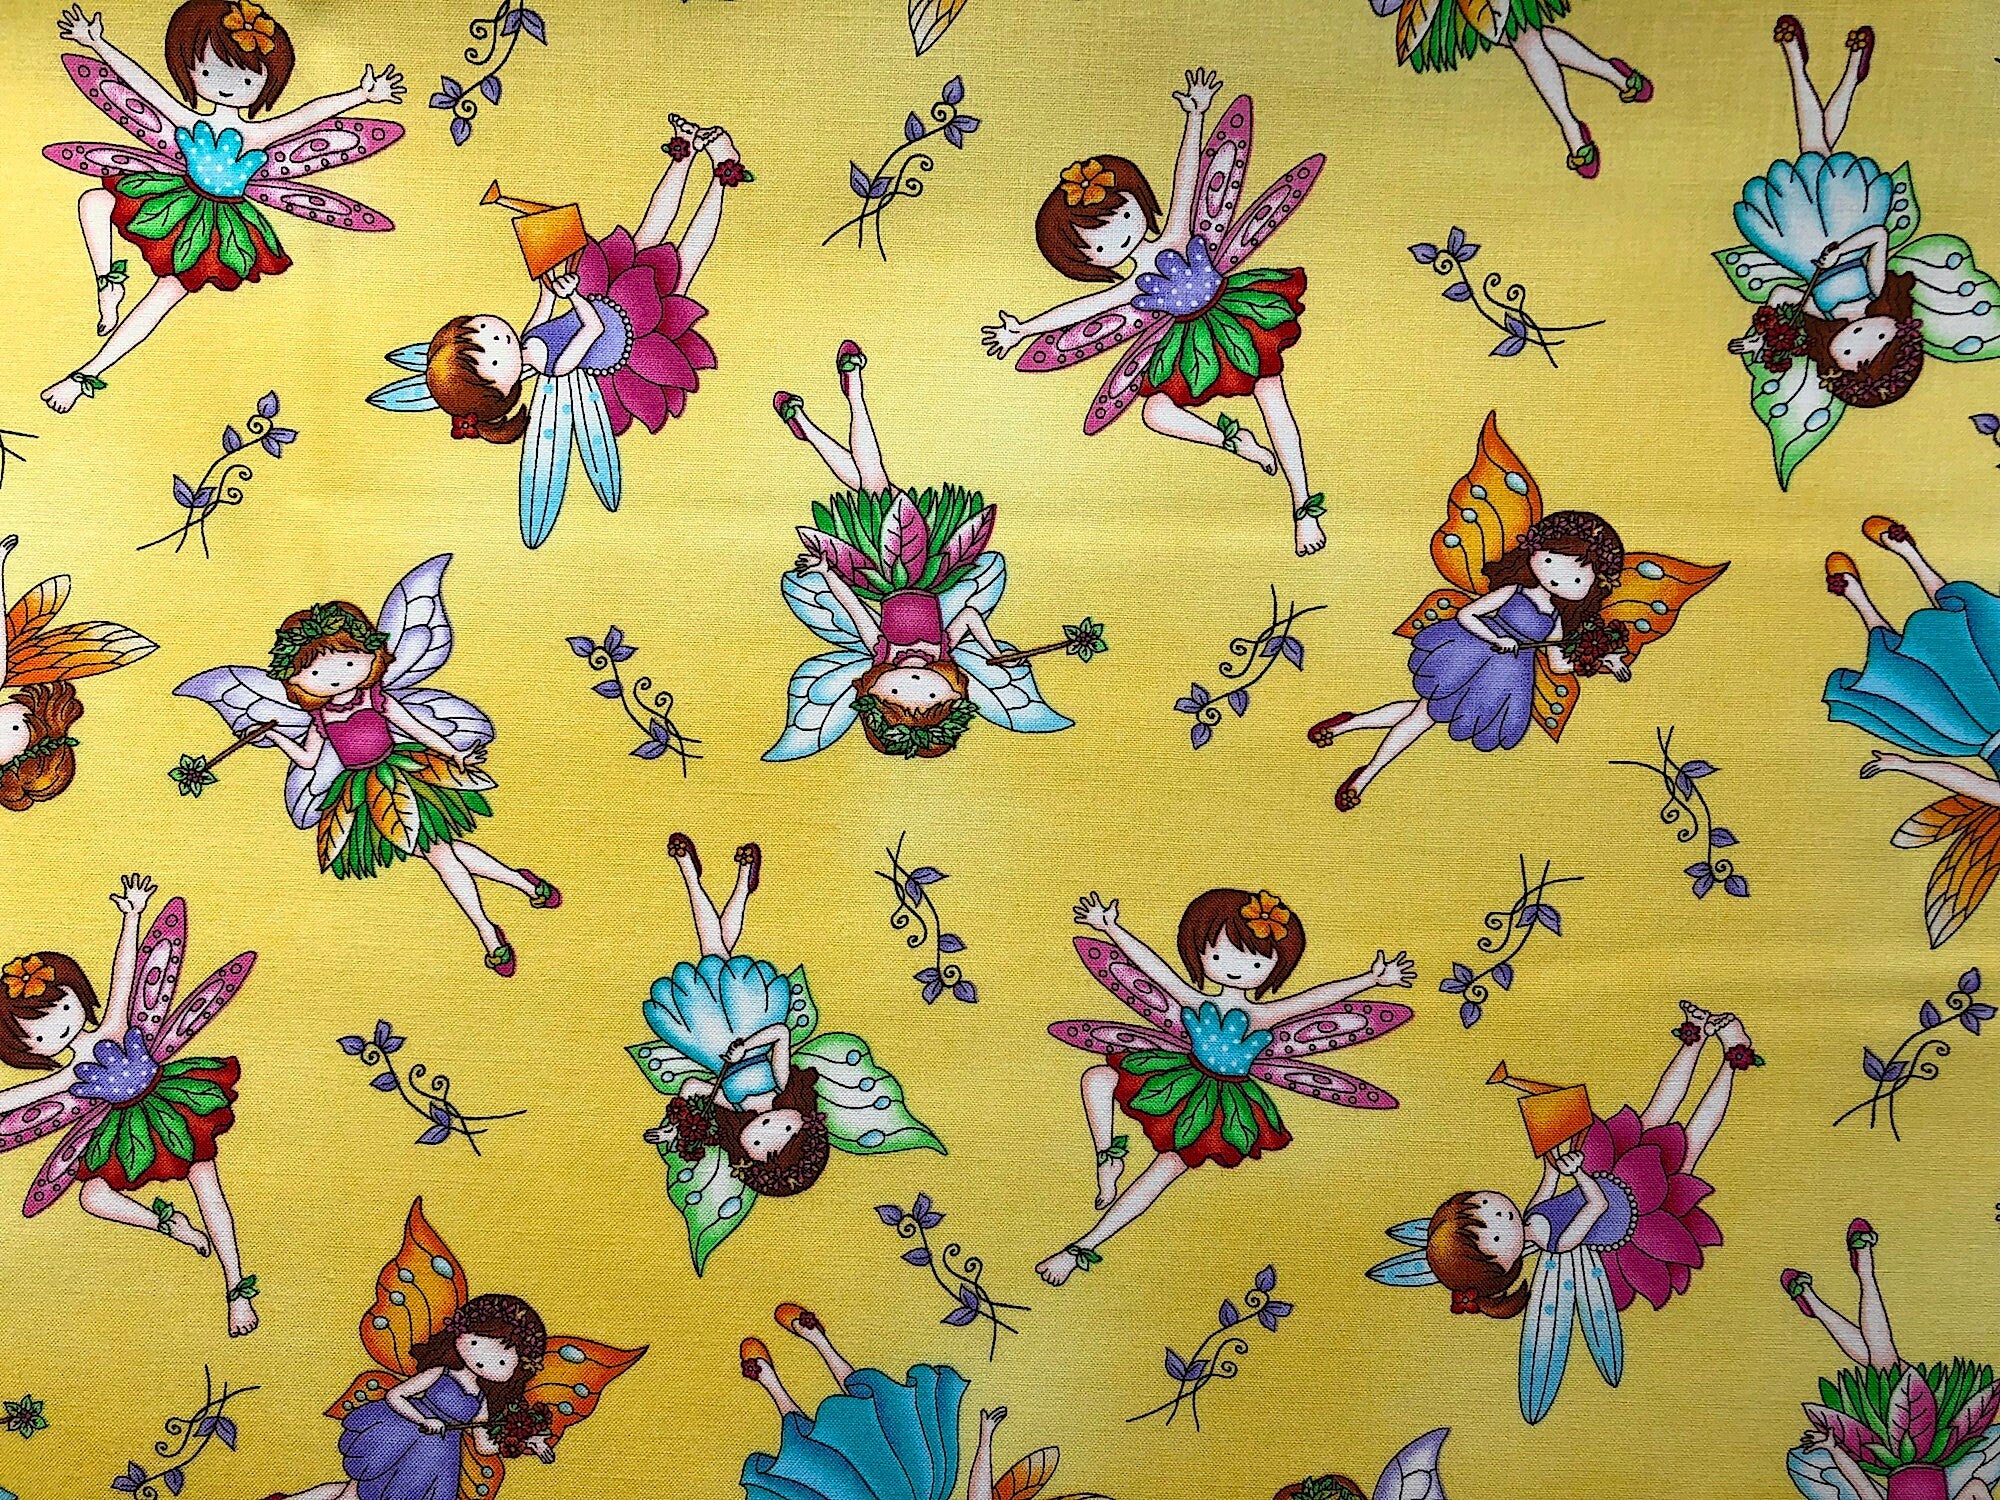 This fabric is called Fairy Land and has girl fairies on a yellow background.